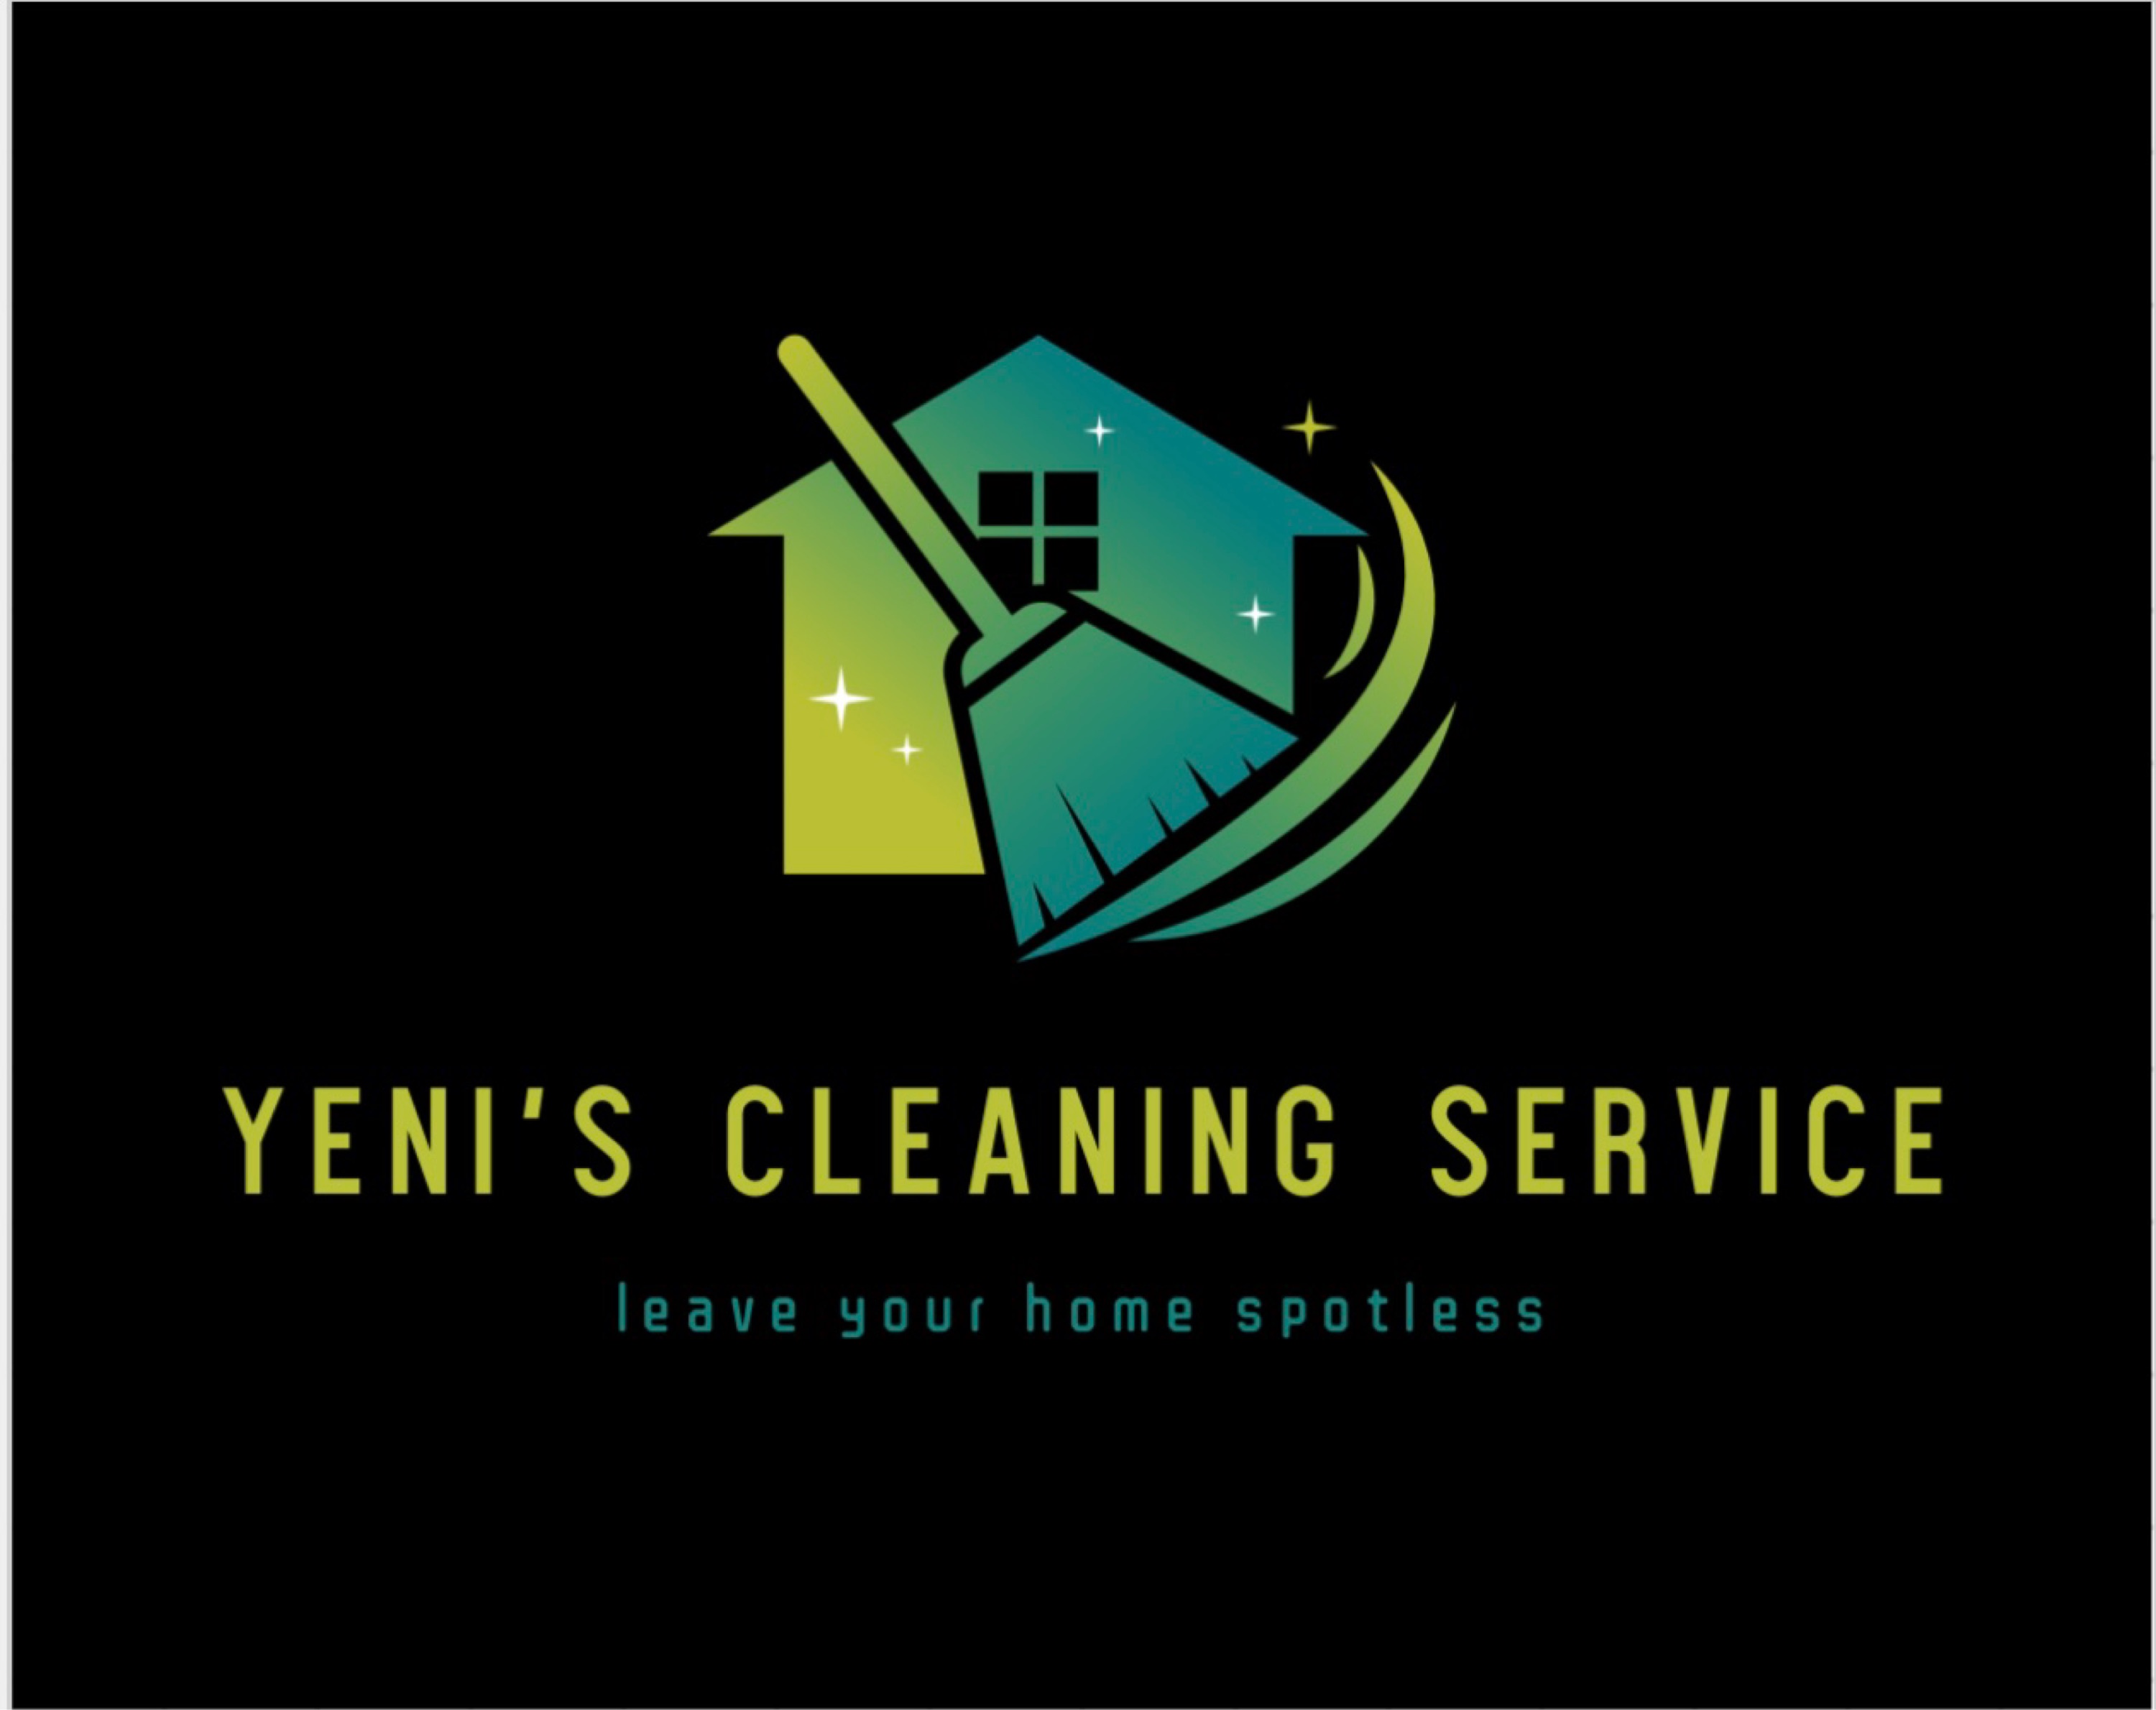 Yeni's Cleaning Services Logo